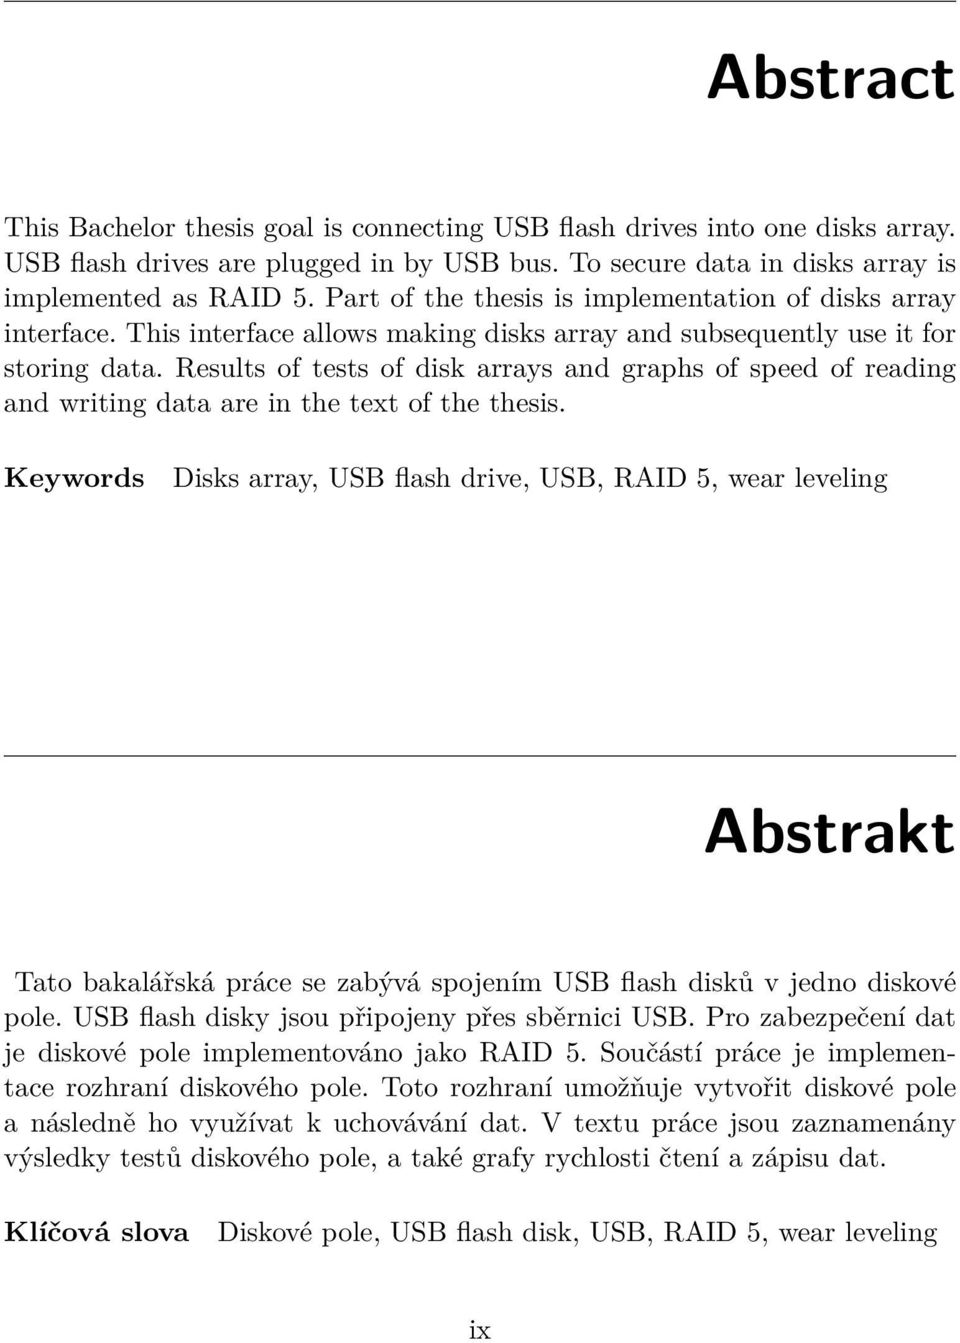 Results of tests of disk arrays and graphs of speed of reading and writing data are in the text of the thesis.